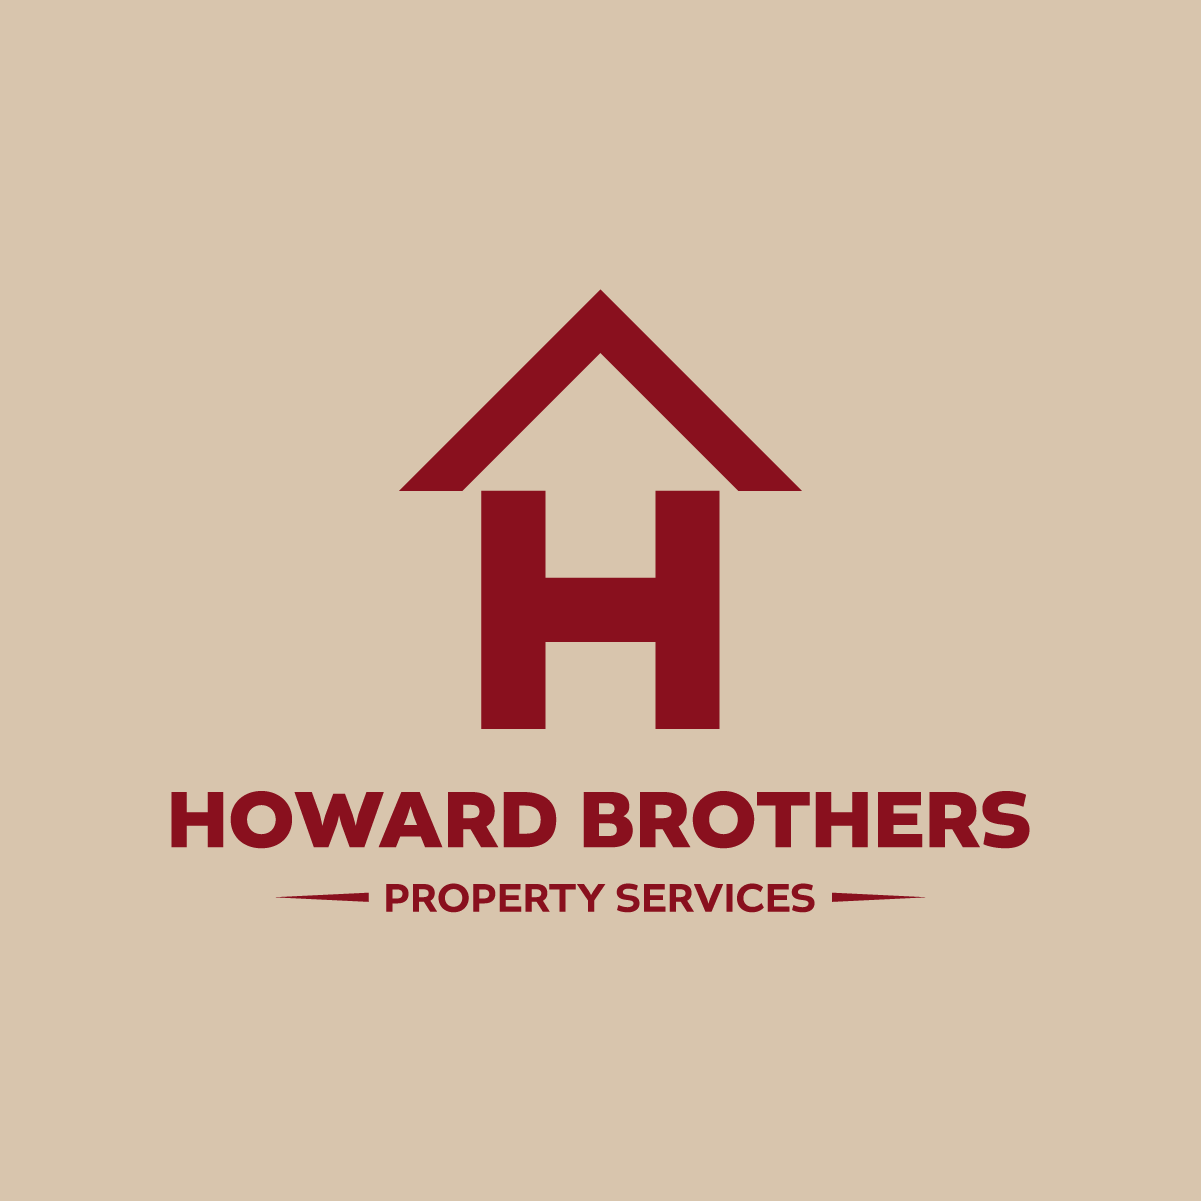 Howard Brothers Property Services Logo